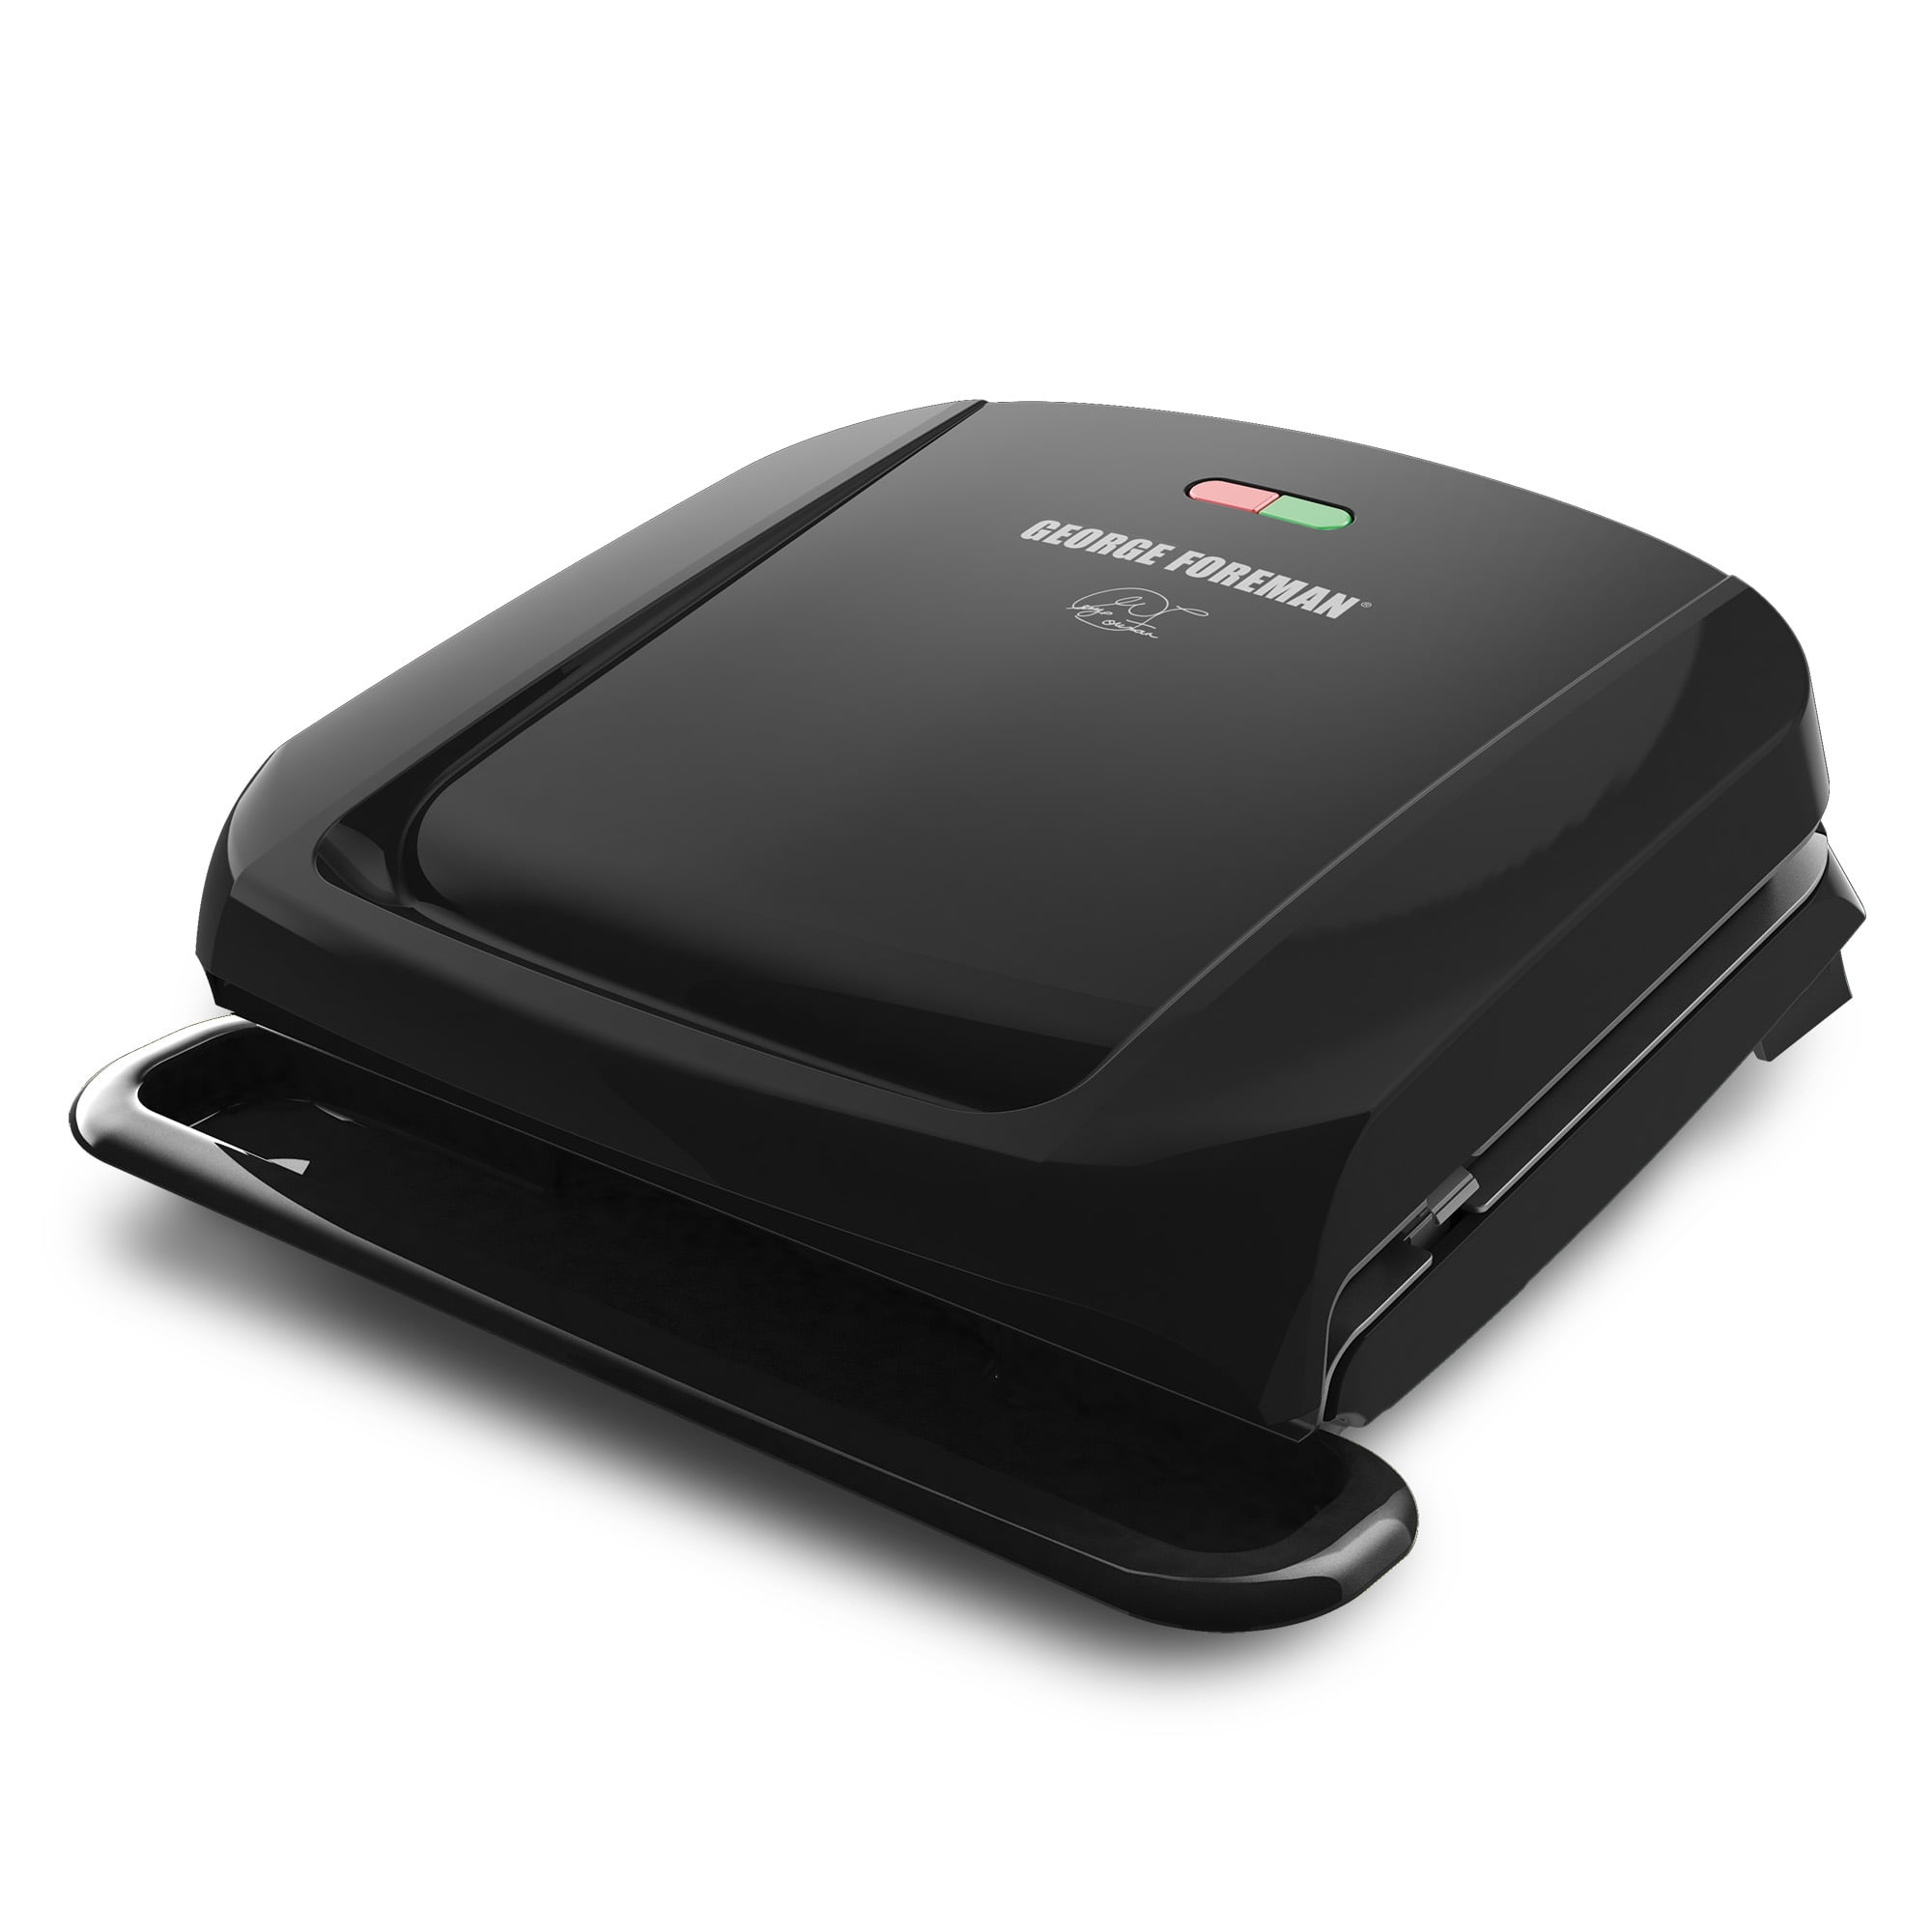 George Foreman 4-Serving Removable Plate Grill and Panini Press Red Grp360r